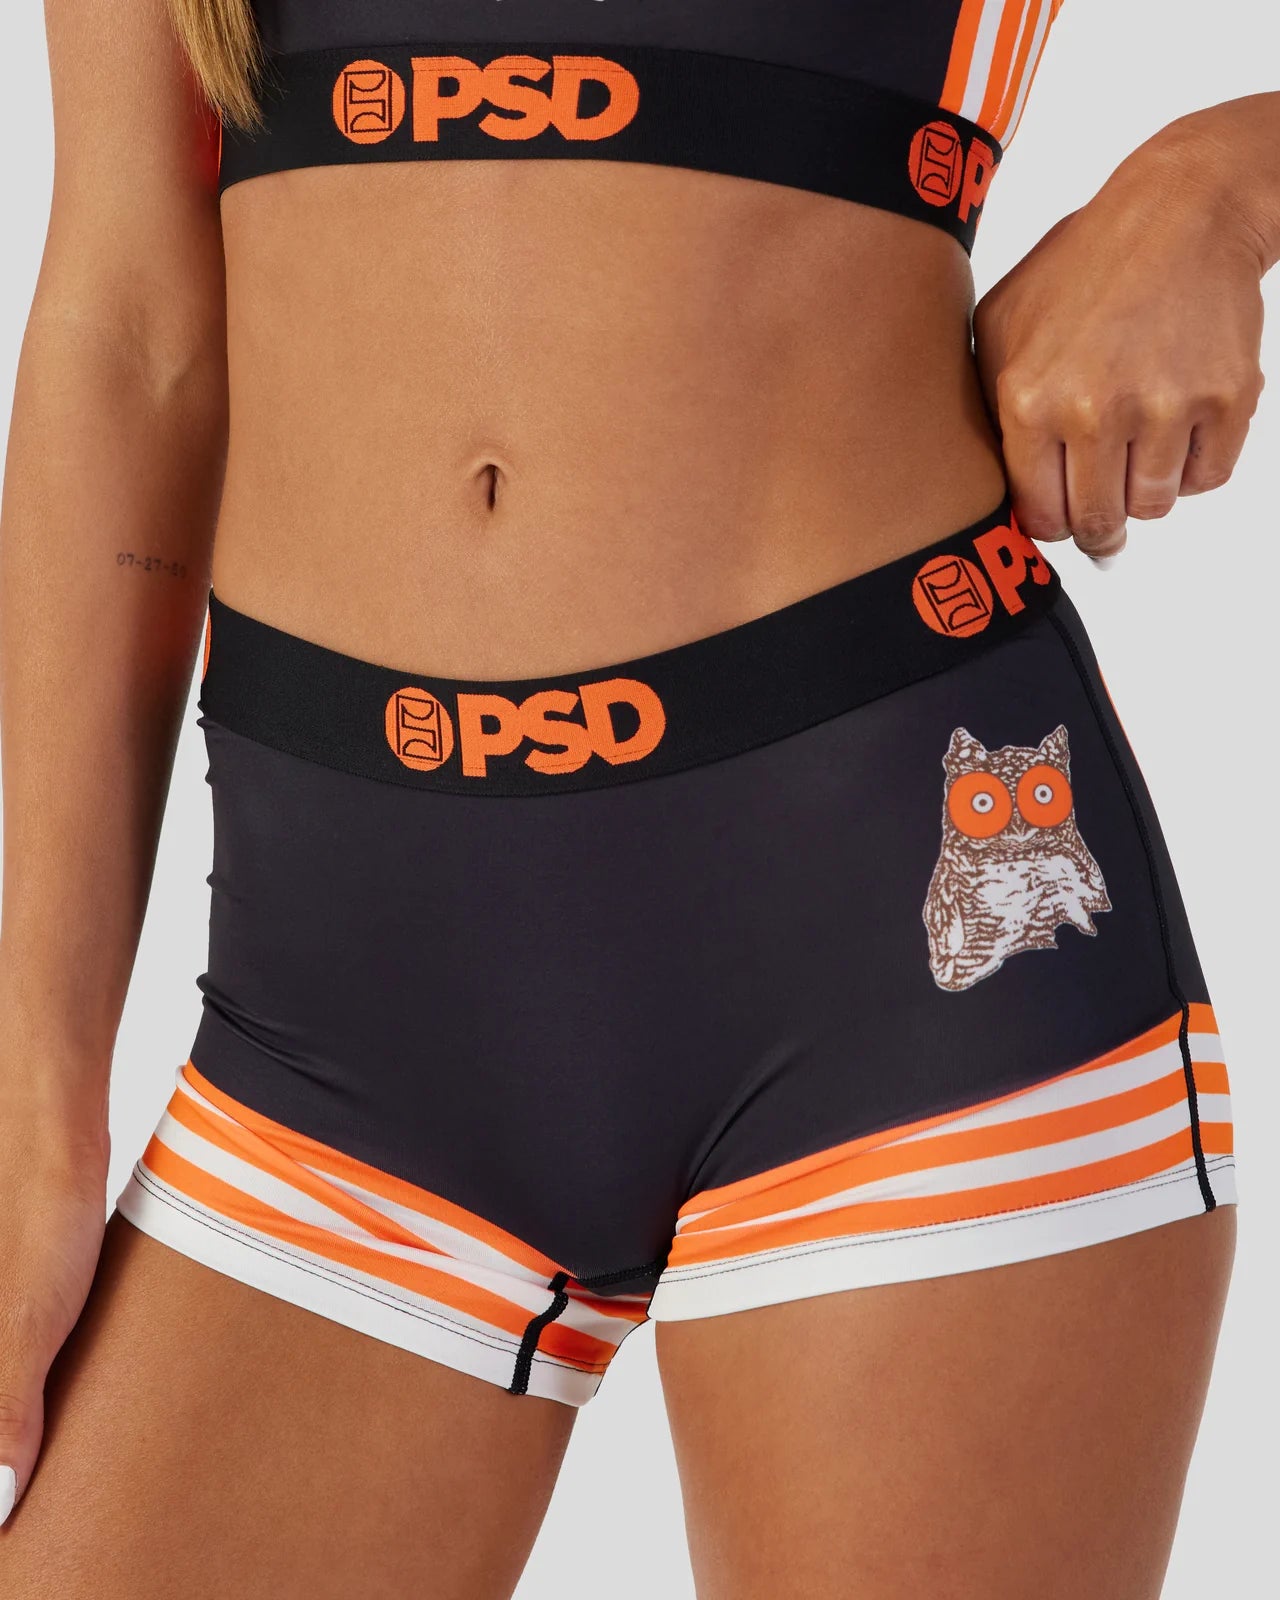 **3 pc. lot** PSD Hooters underwear (size large) NWT